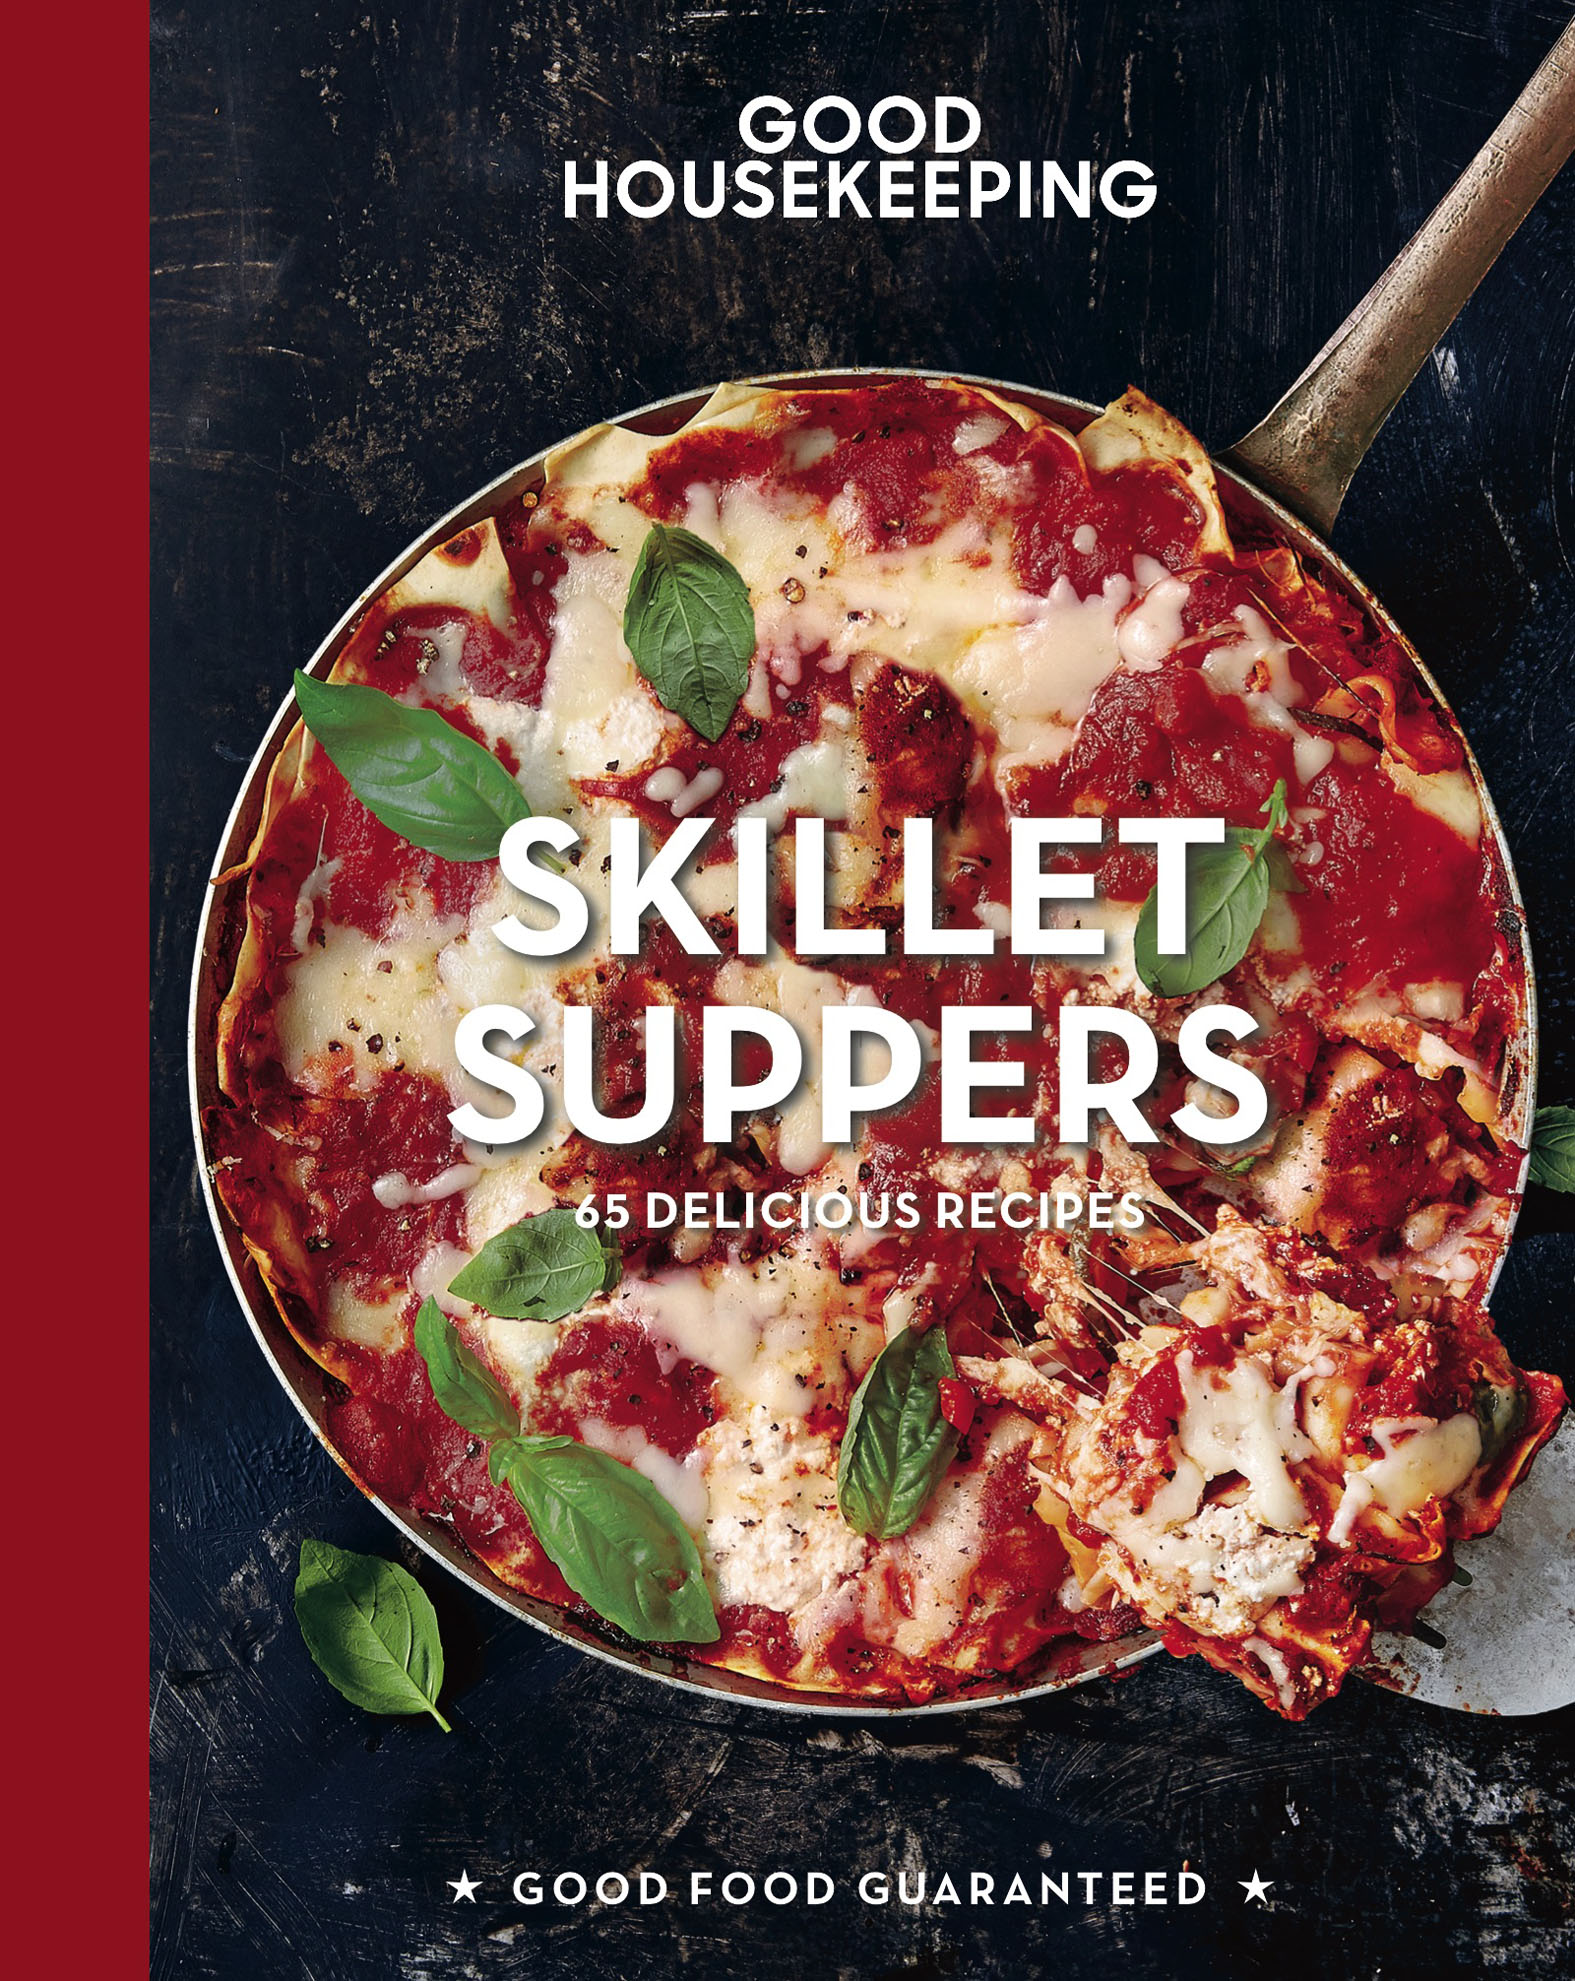 Good Housekeeping skillet suppers cover image